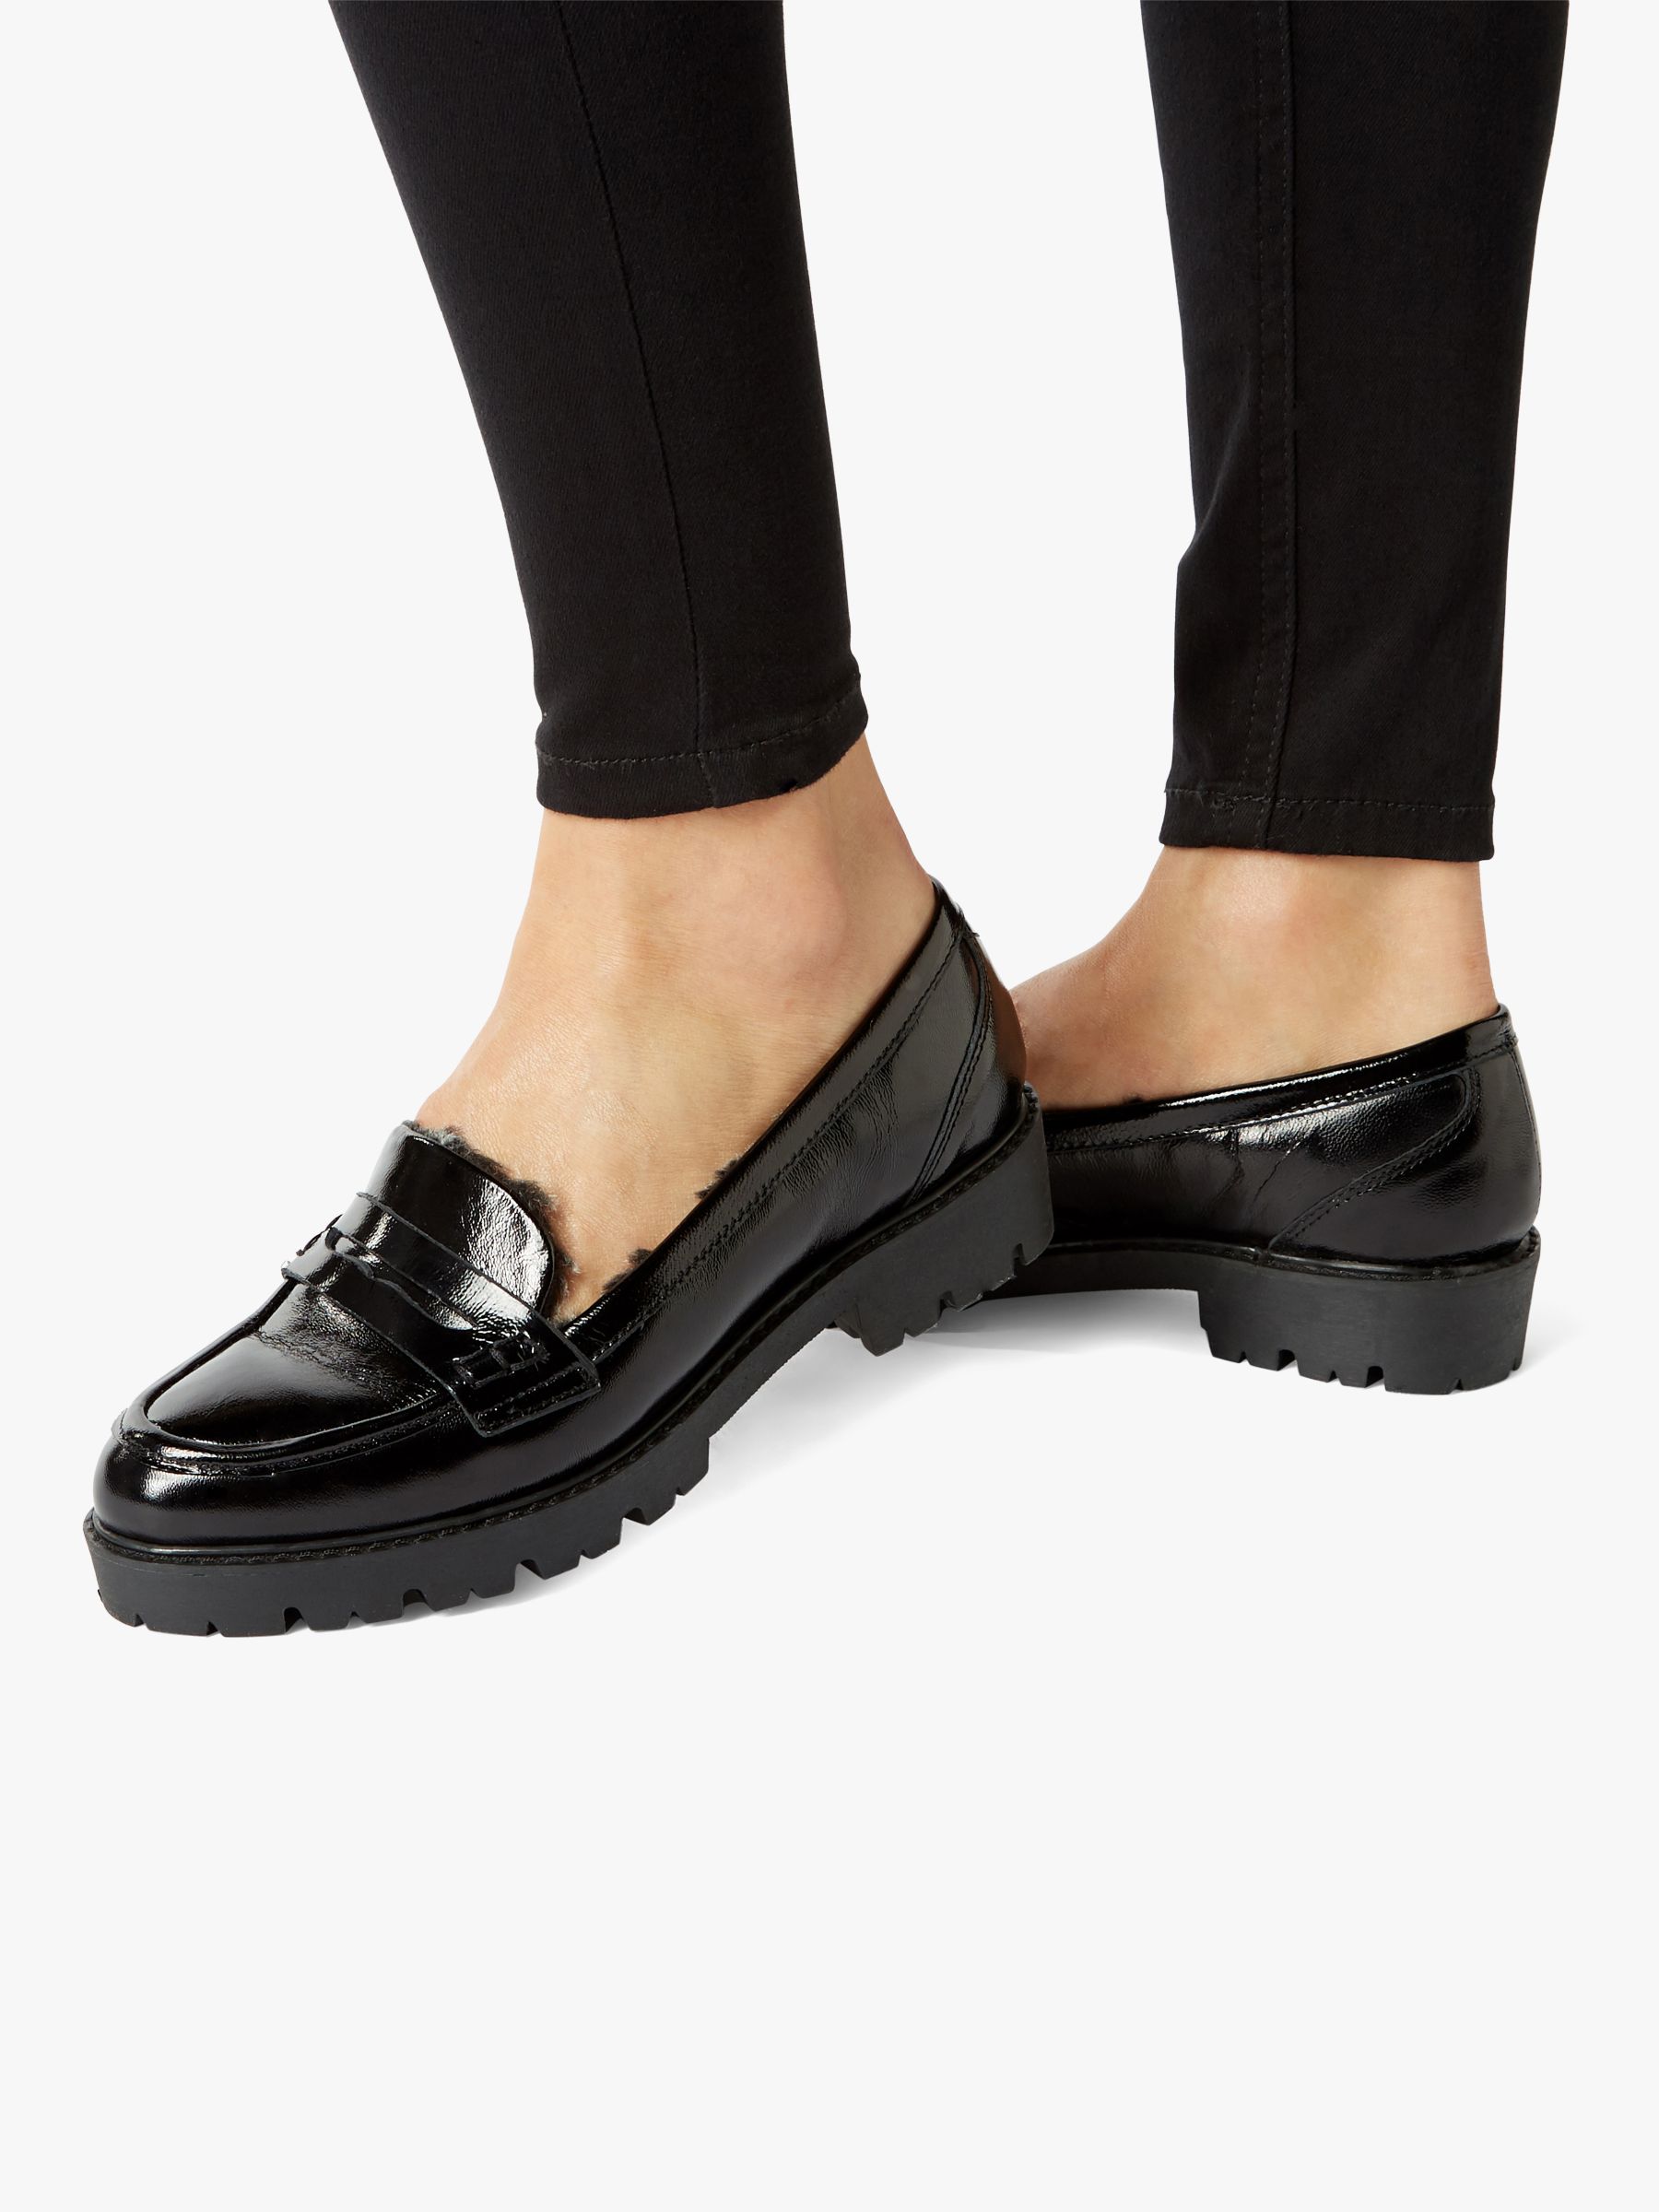 dune fur loafers